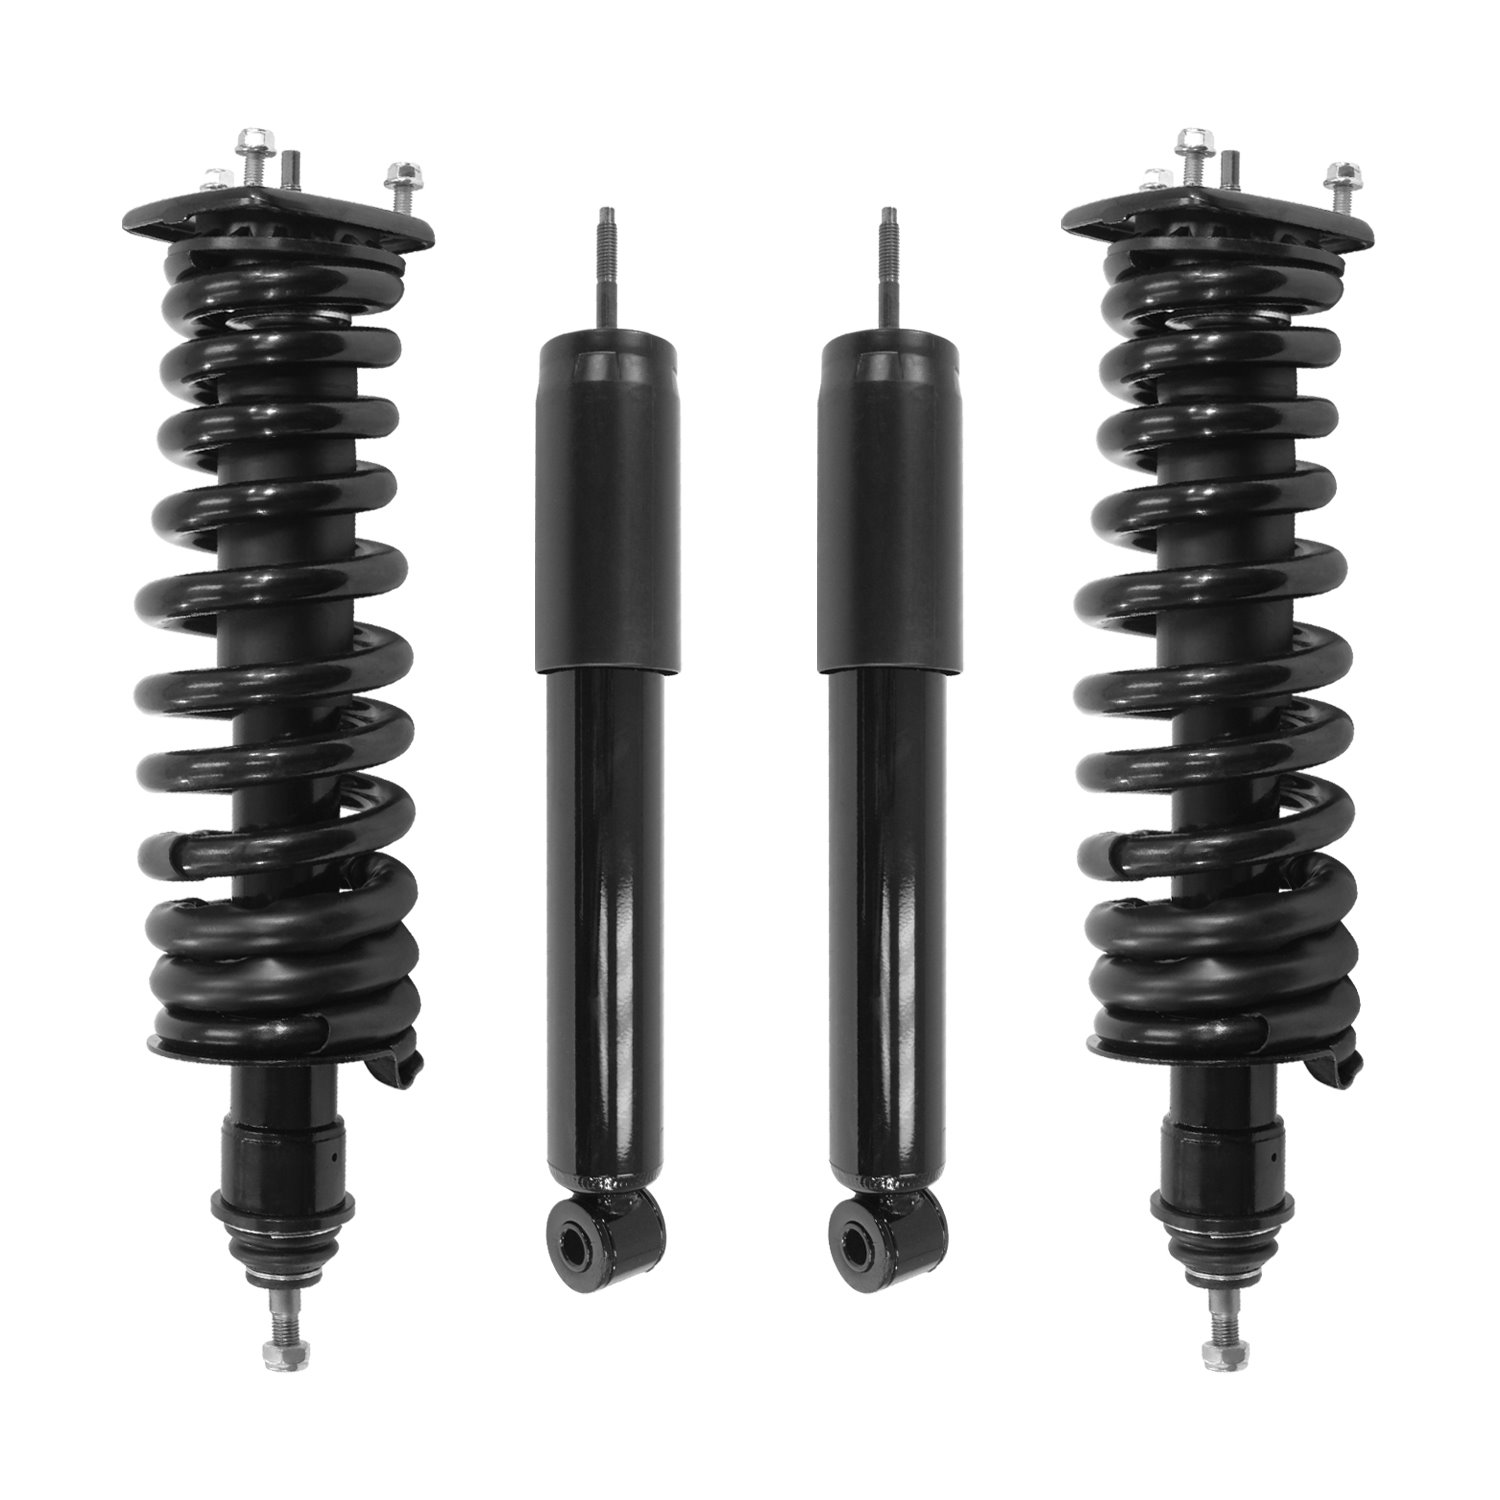 4-257130-15290-001 Front & Rear Suspension Strut & Coil Spring Assembly Fits Select Mercedes-Benz